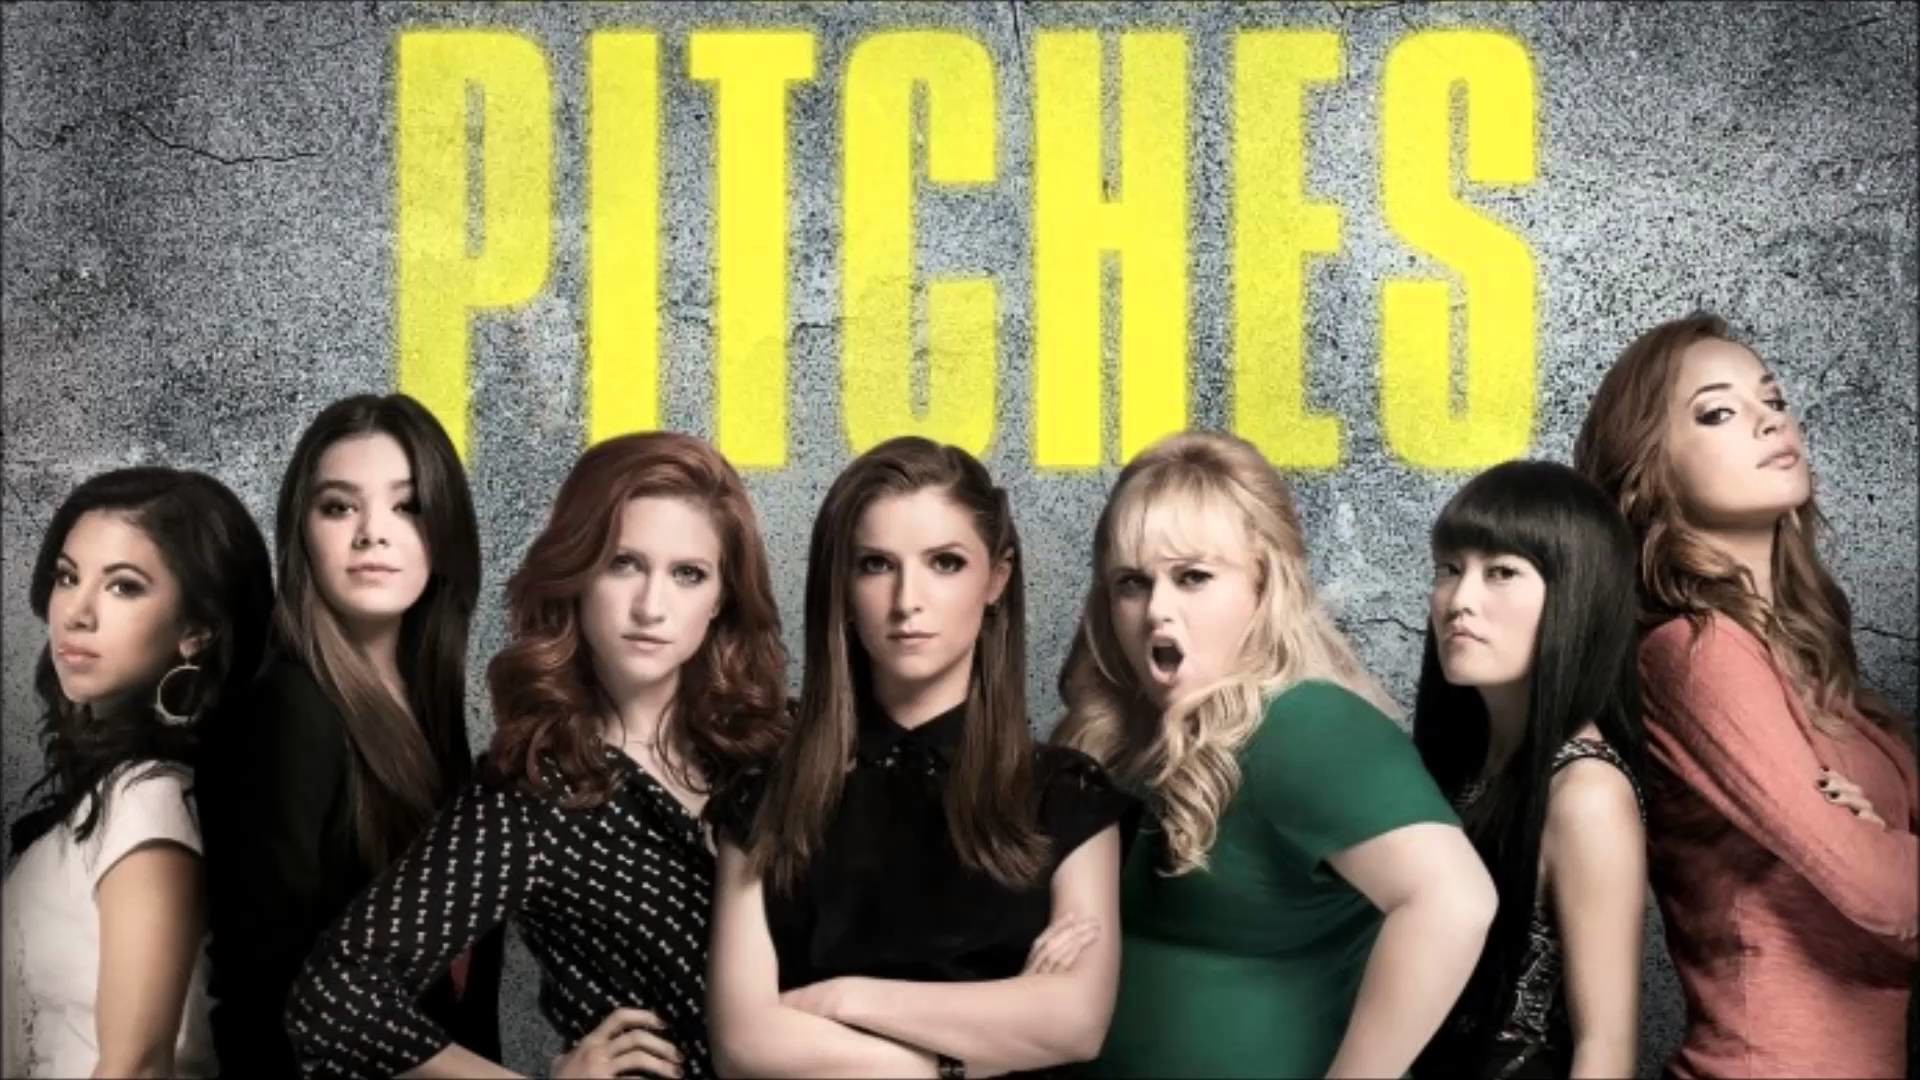 Pitch Perfect Wallpaper.